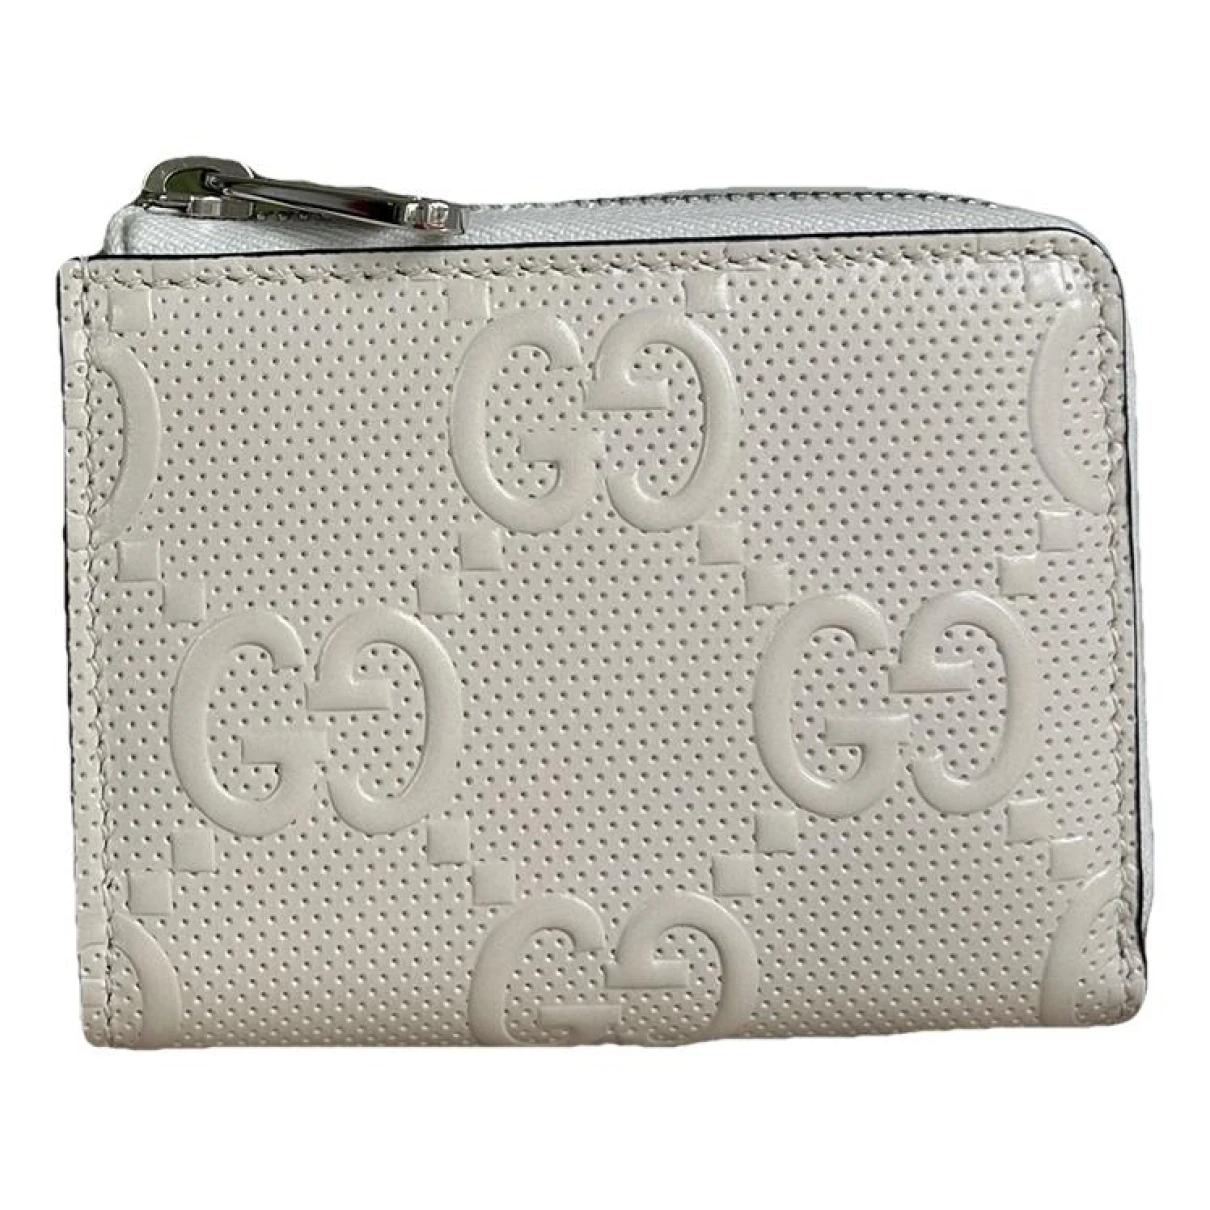 Pre-owned Gucci Leather Wallet In White